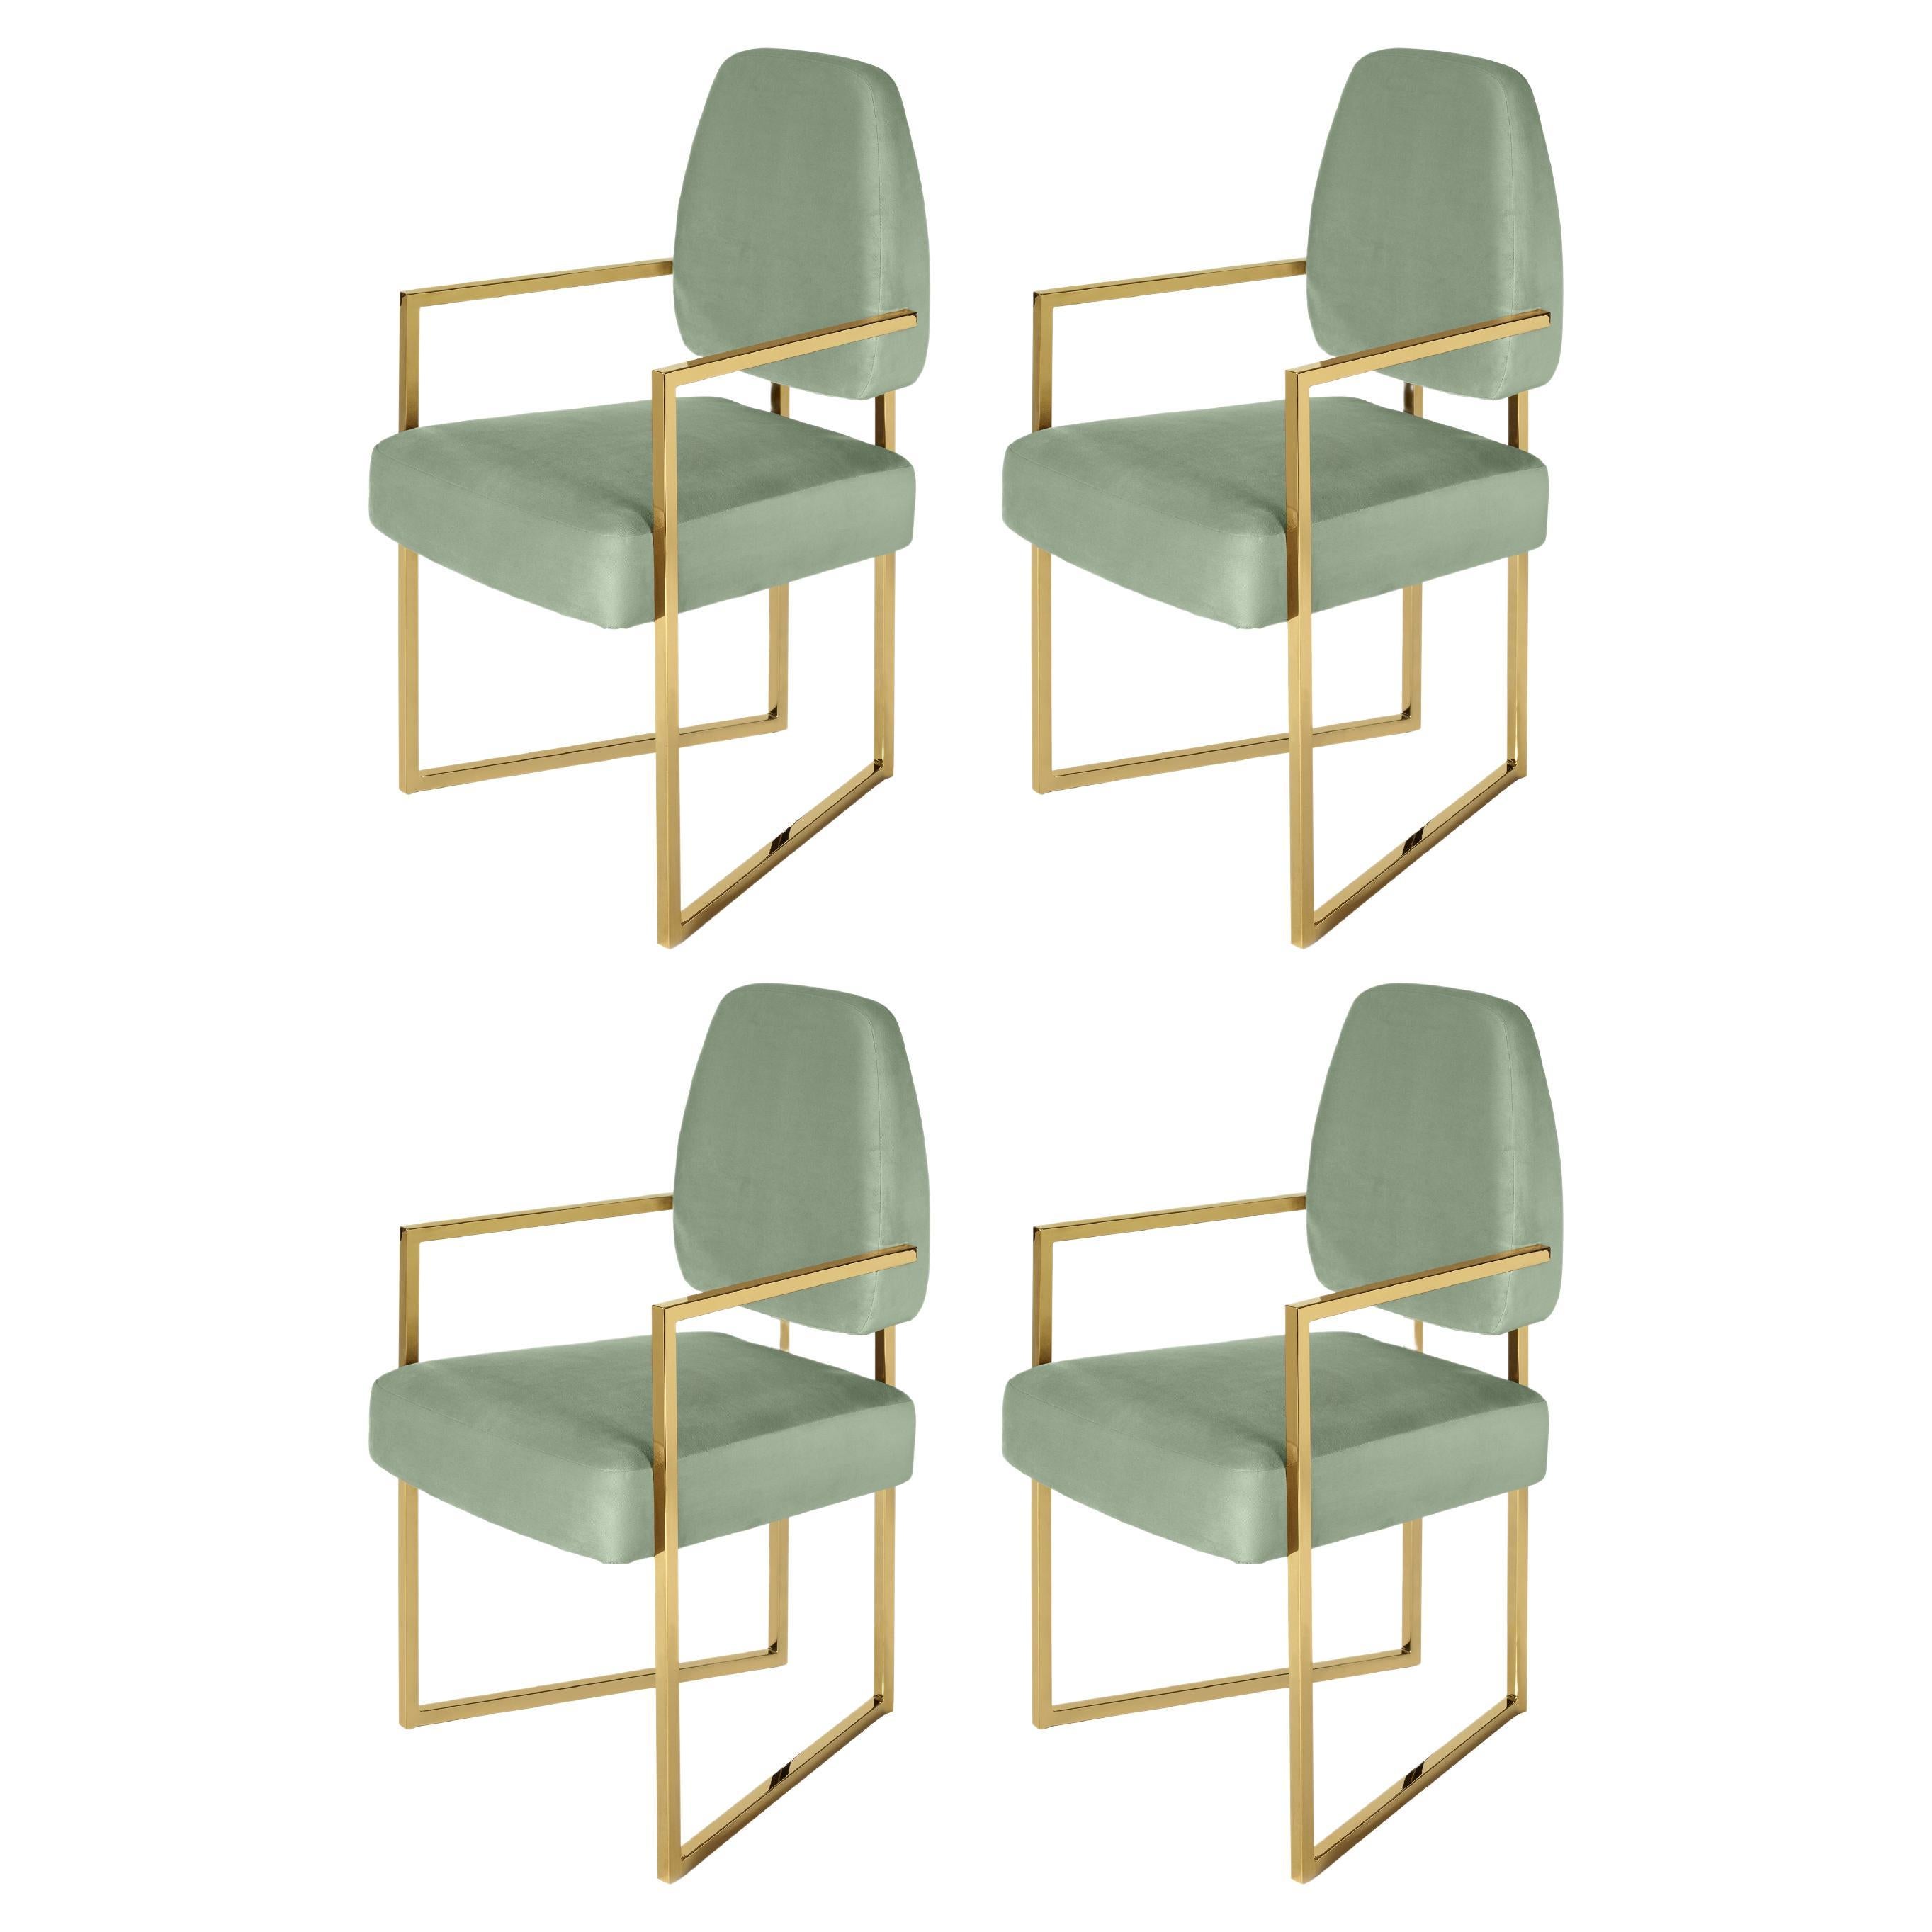 Set of 4 Perspective Dining Chair by InsidherLand